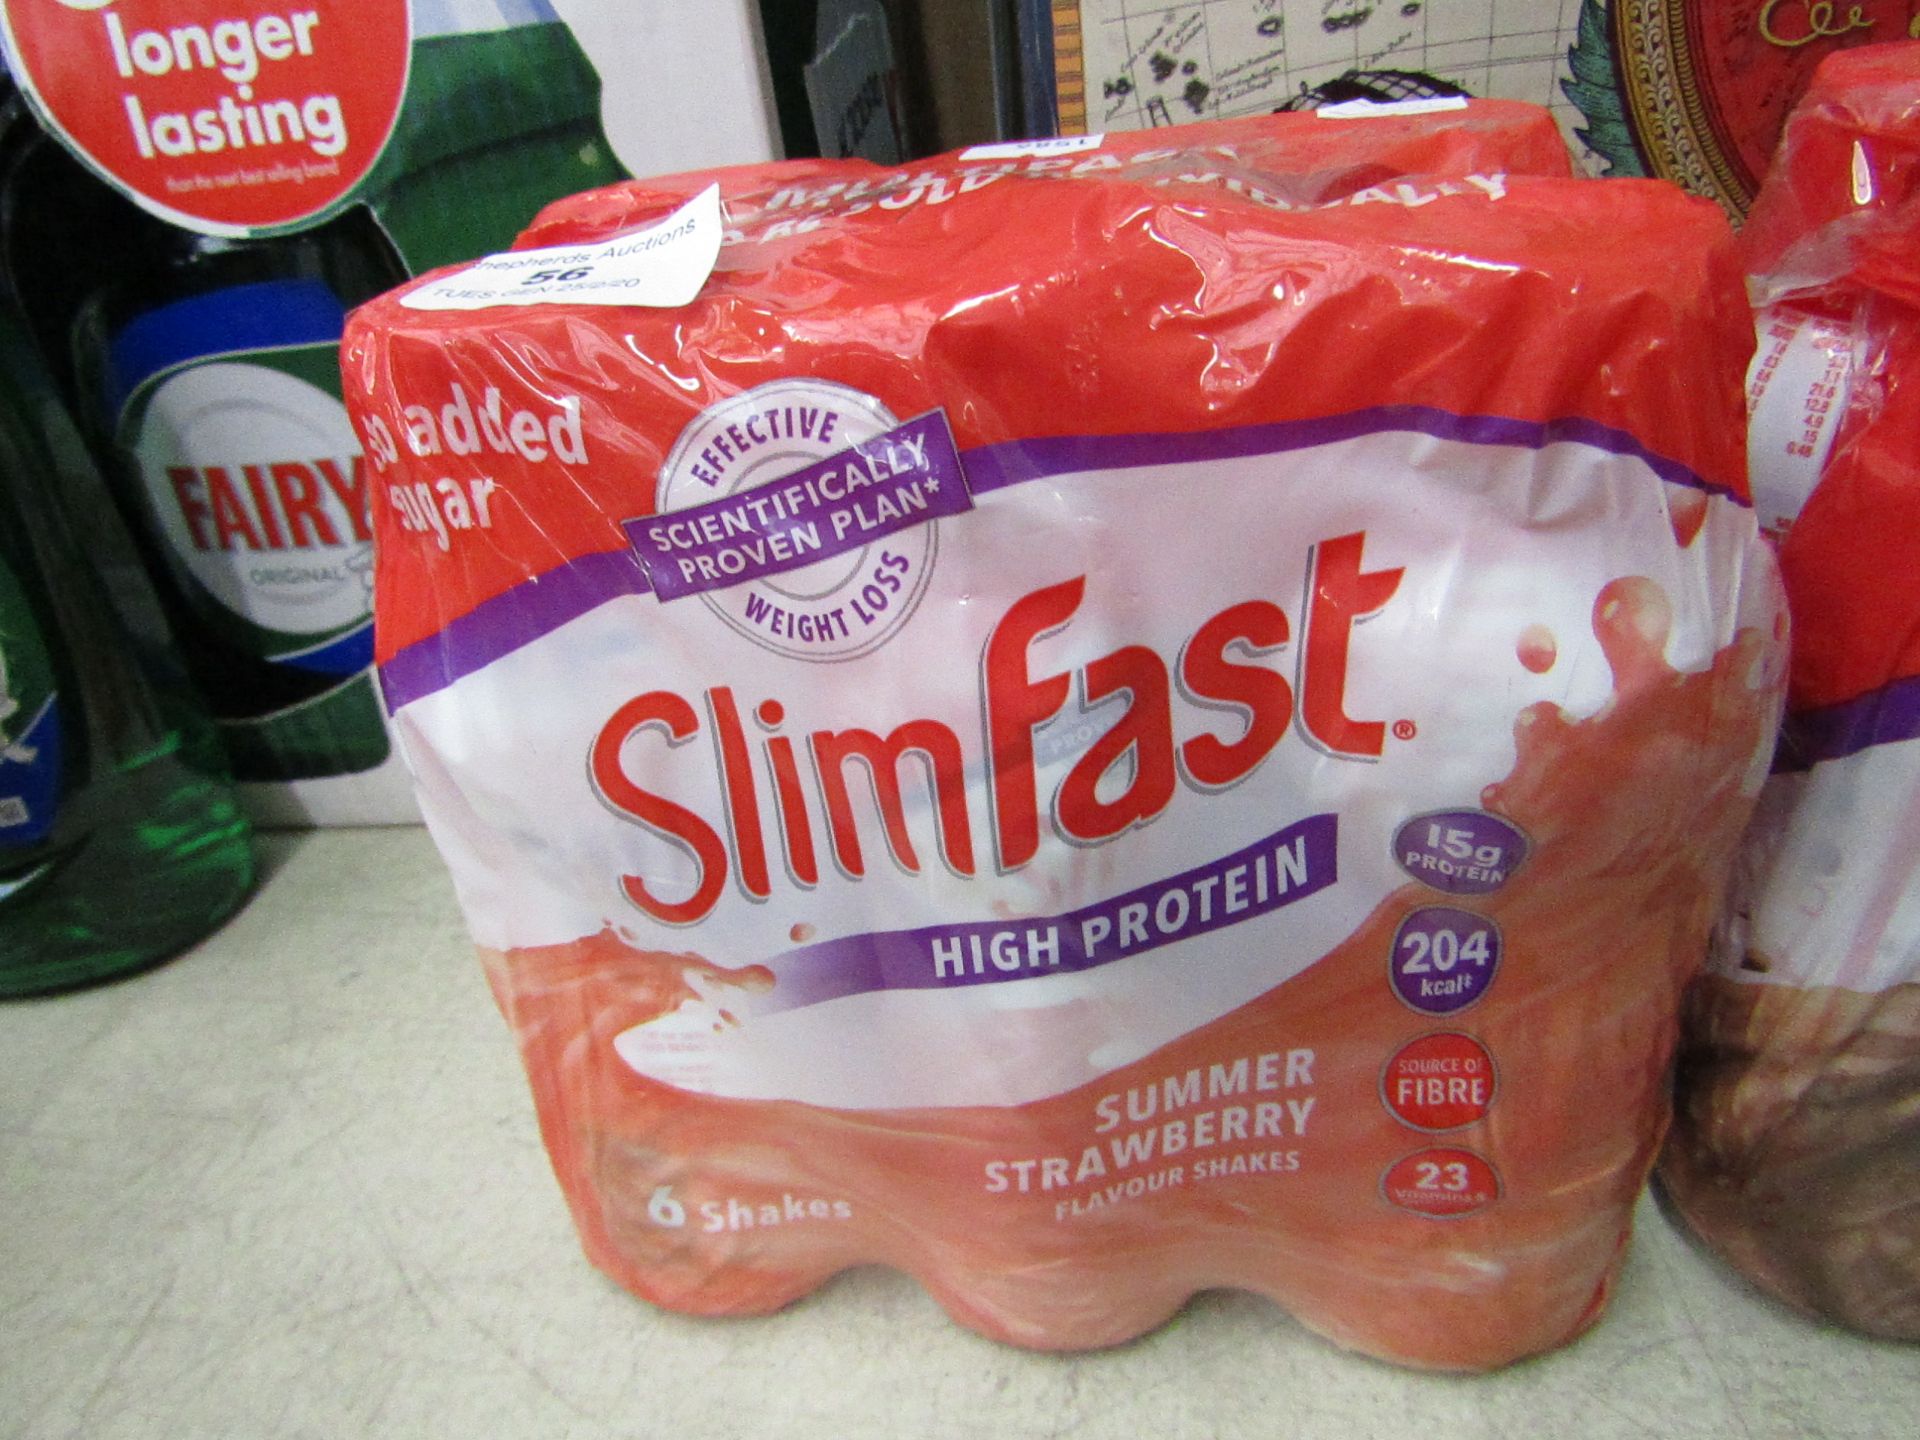 Slim Fast - High Protein - Summer Strawberry flavoured Shakes 6 Pack - BB 09/20